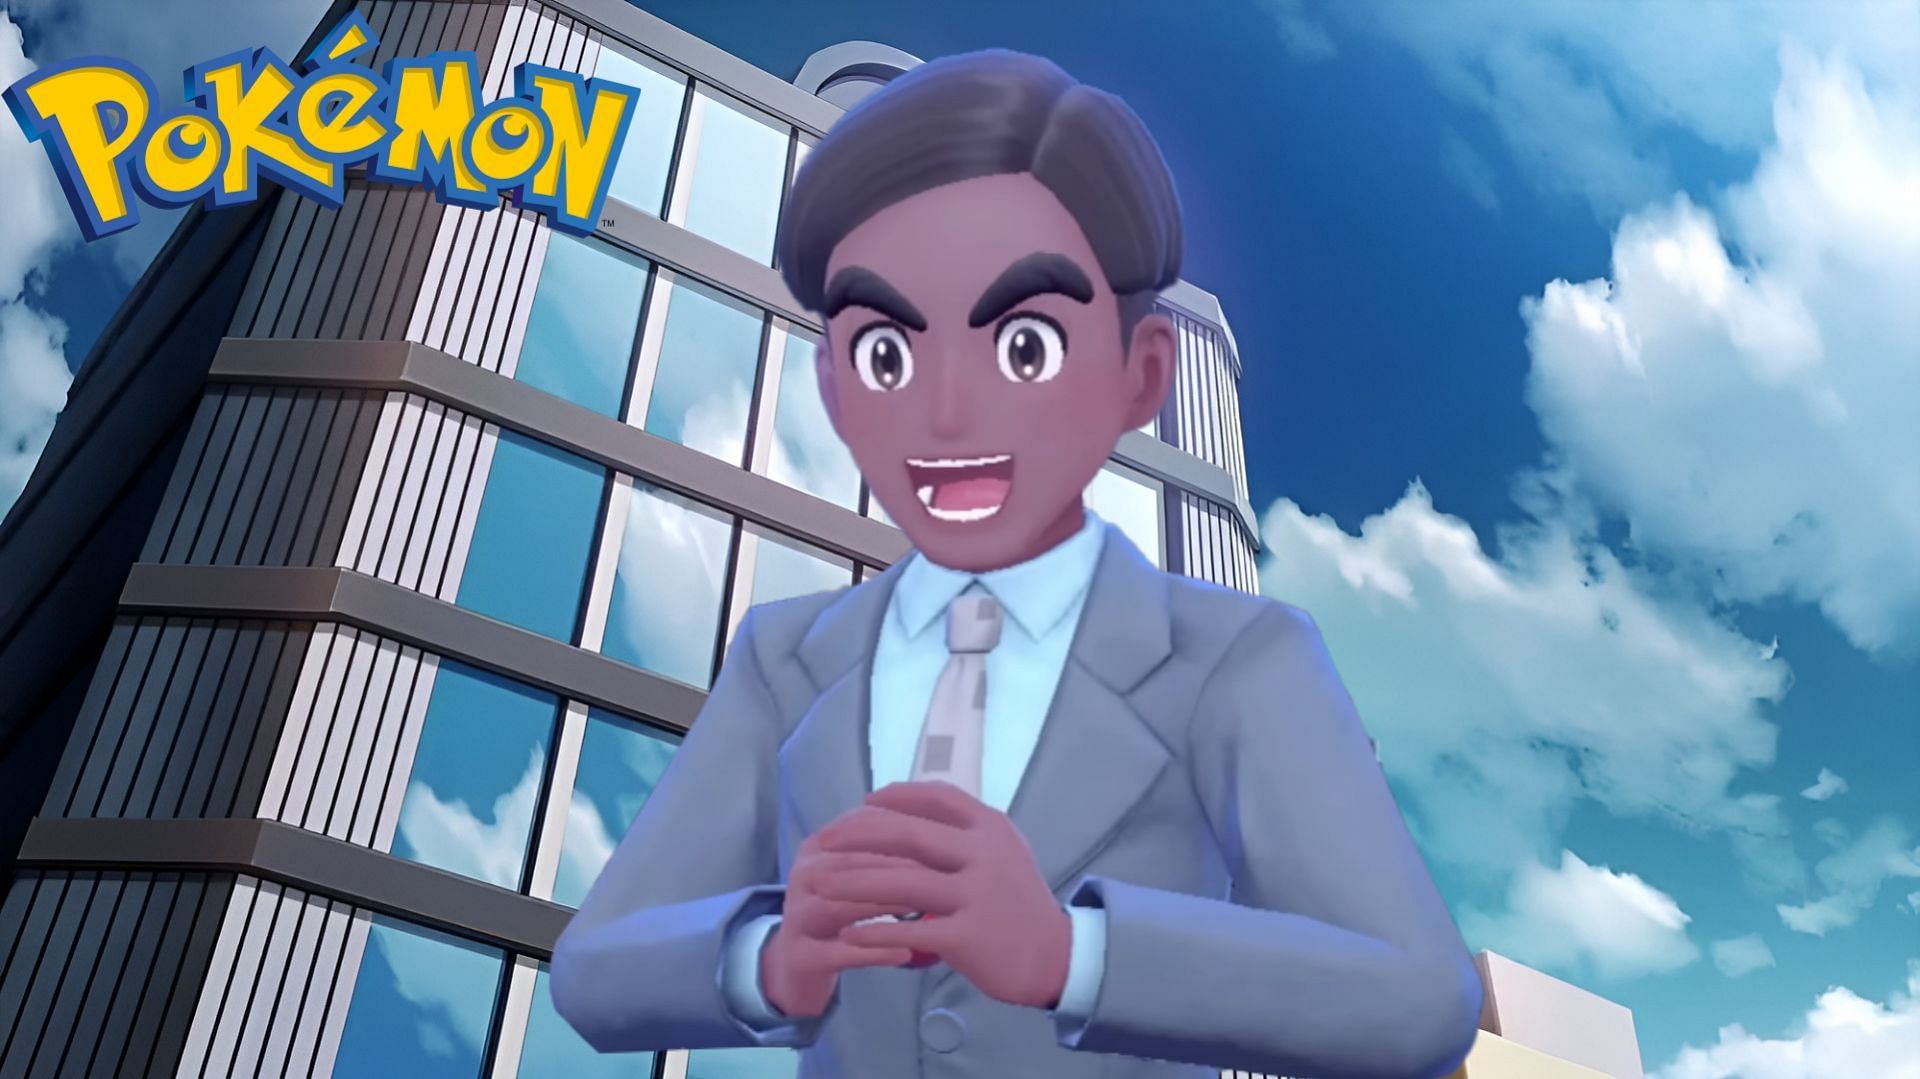 Ways Pokemon could be reimagined as a management sim